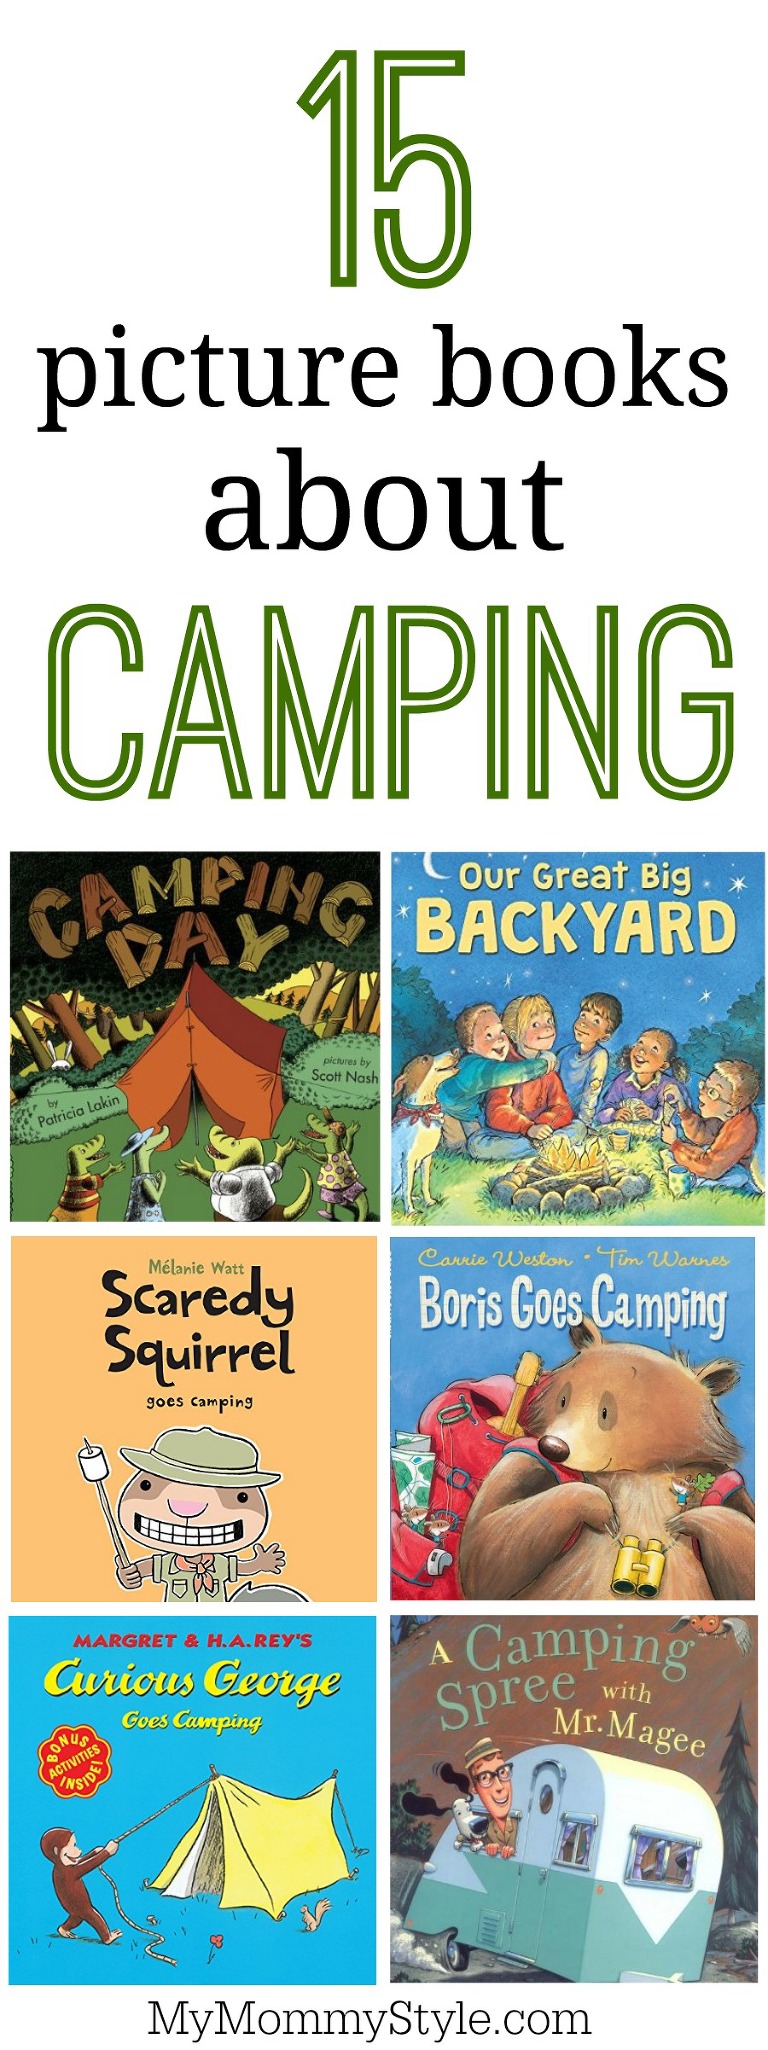 15 Camping Books for Kids (With Pictures) - My Mommy Style